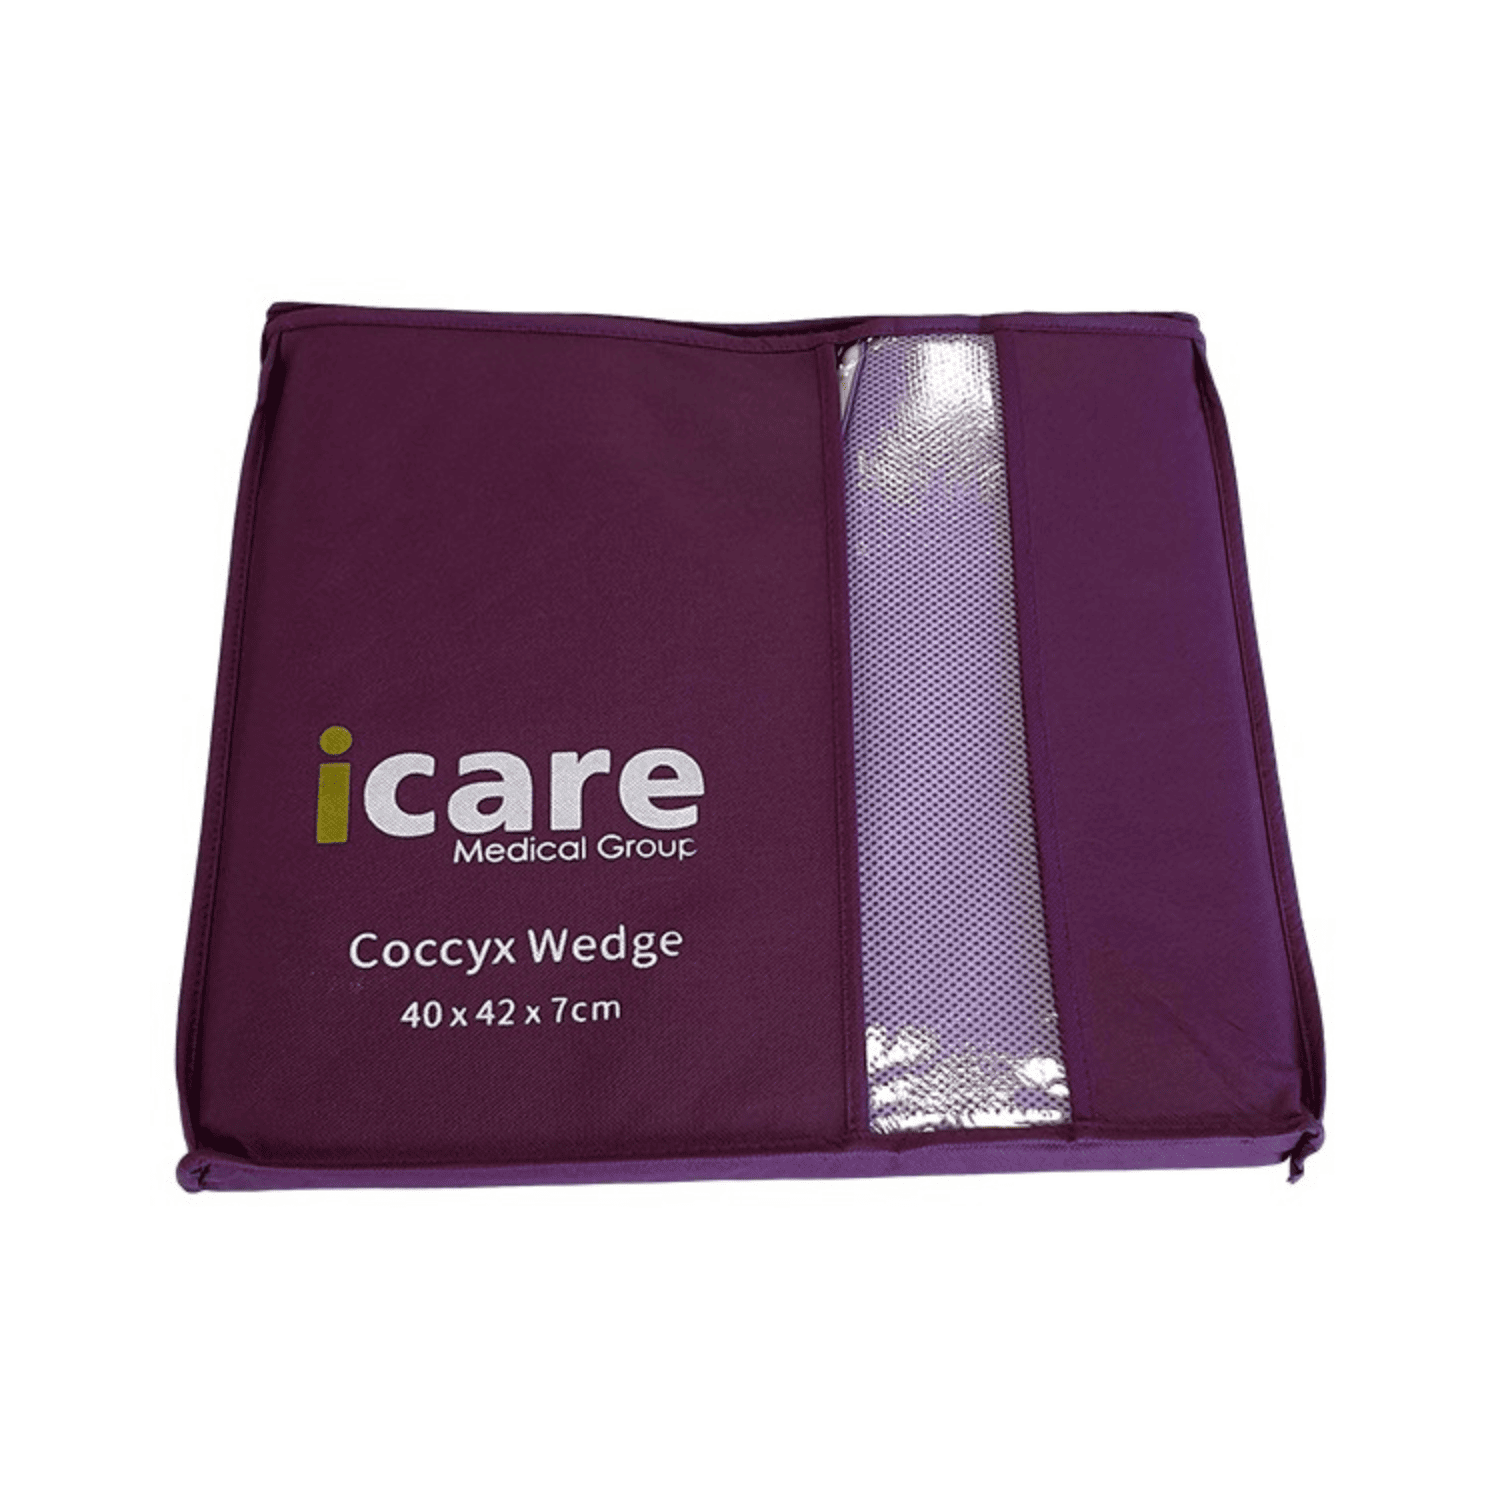 Icare Coccyx Wedge